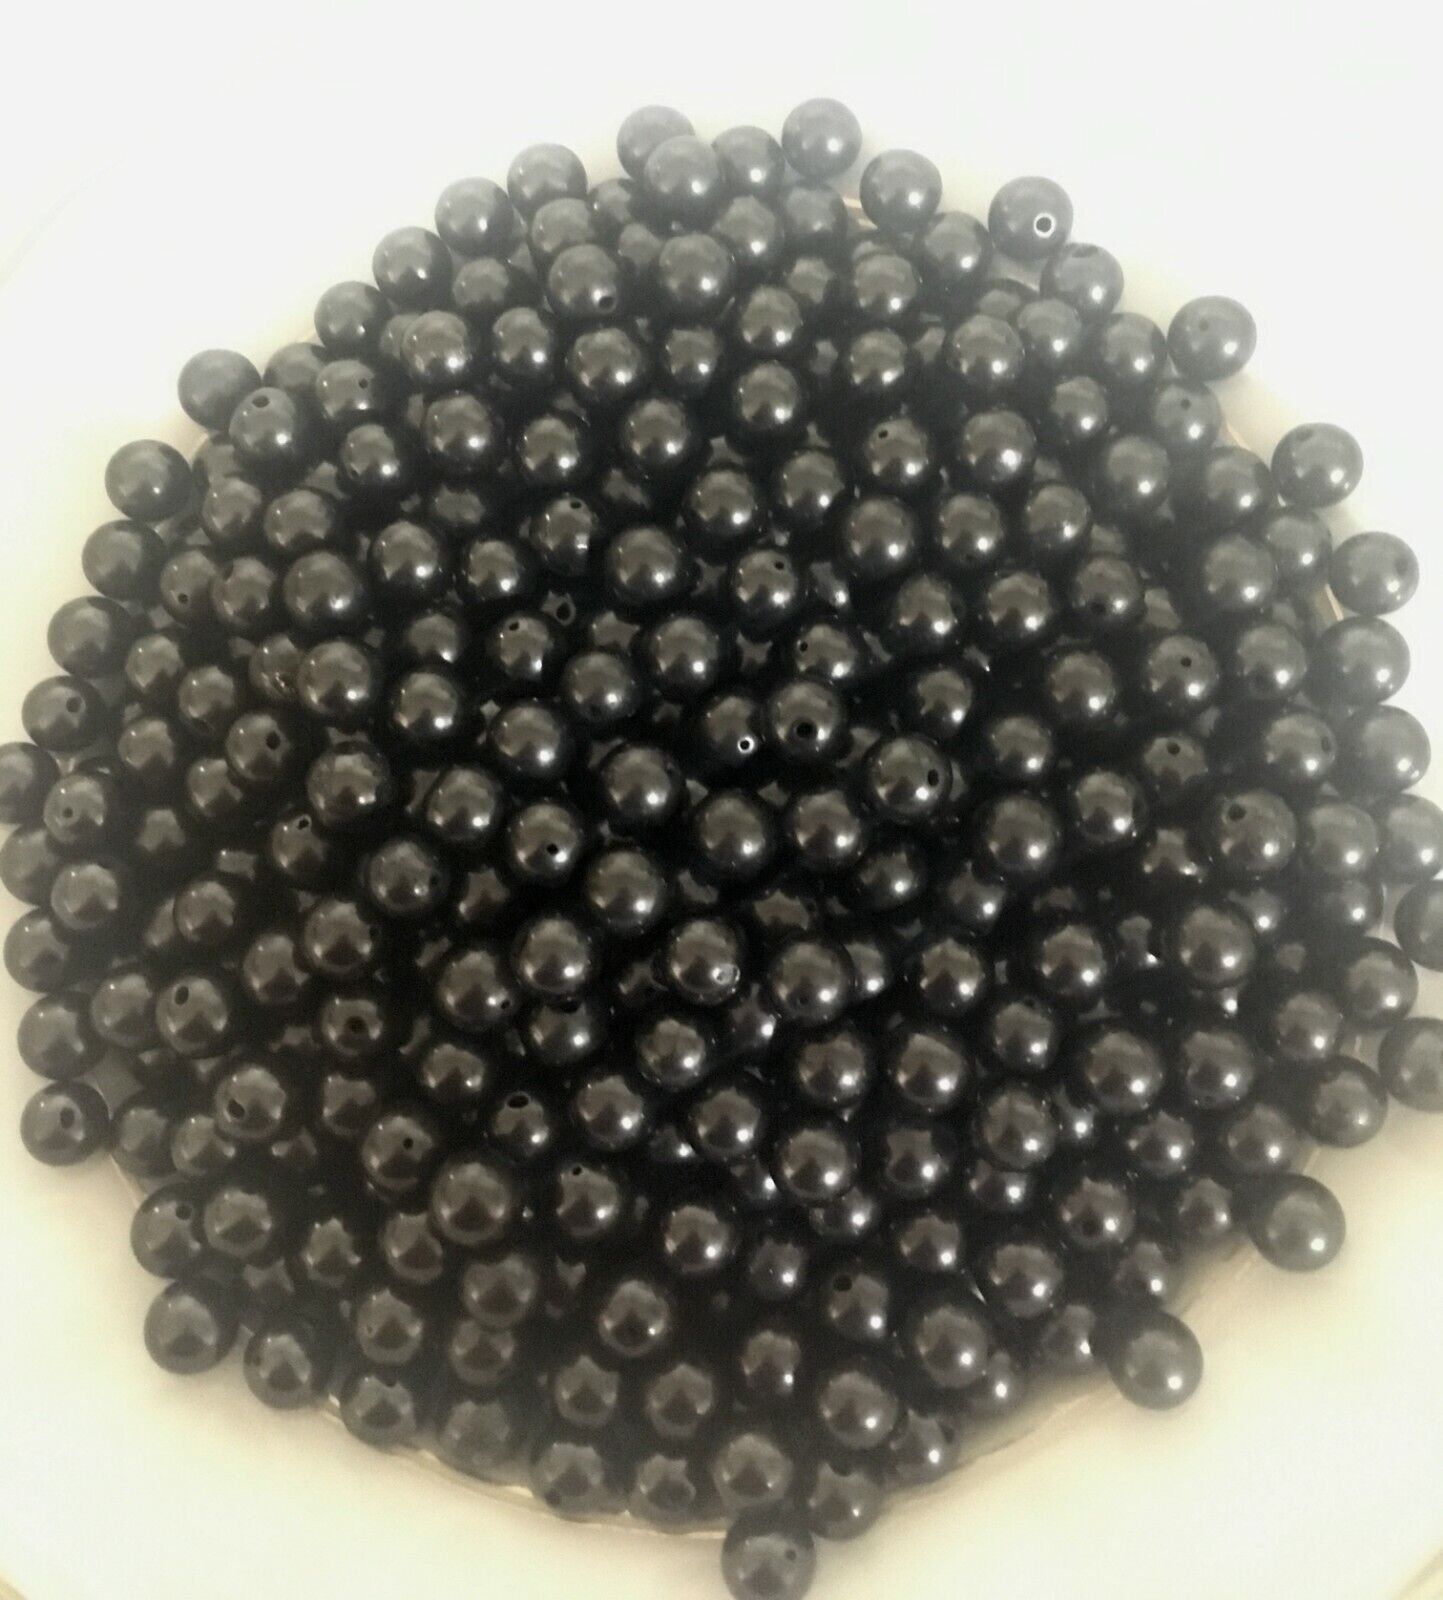 10 pcs SHUNGITE Stone 7 mm Polished Round Beads From Russia - Loose Beads